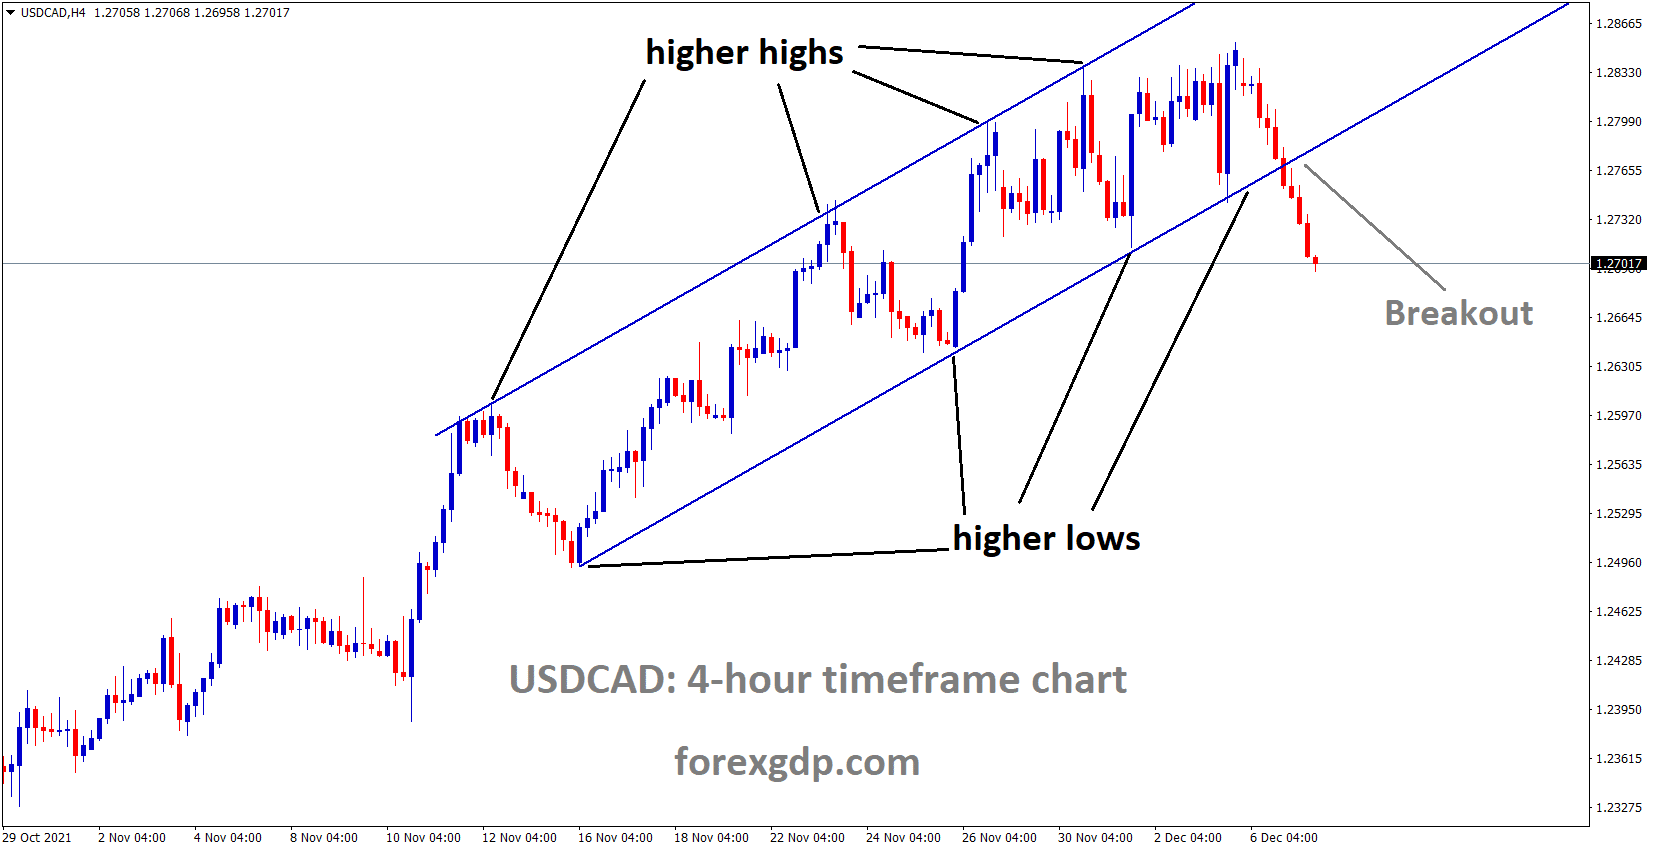 USDCAD has broken the ascending channel pattern.